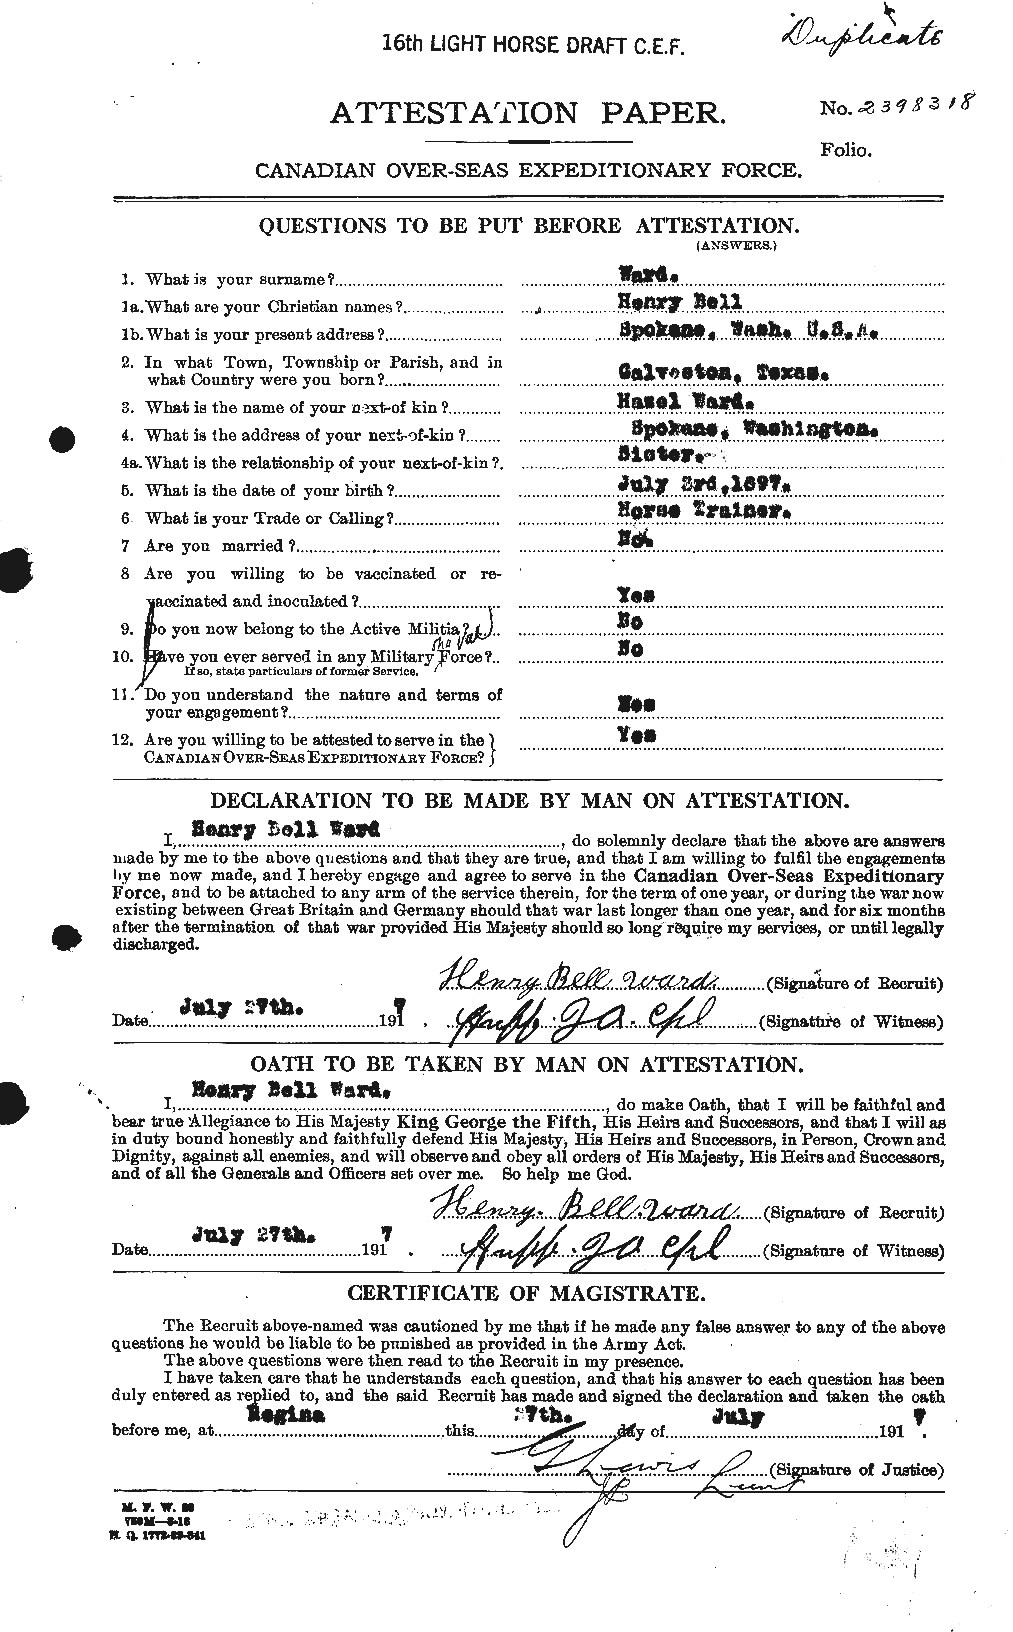 Personnel Records of the First World War - CEF 657830a